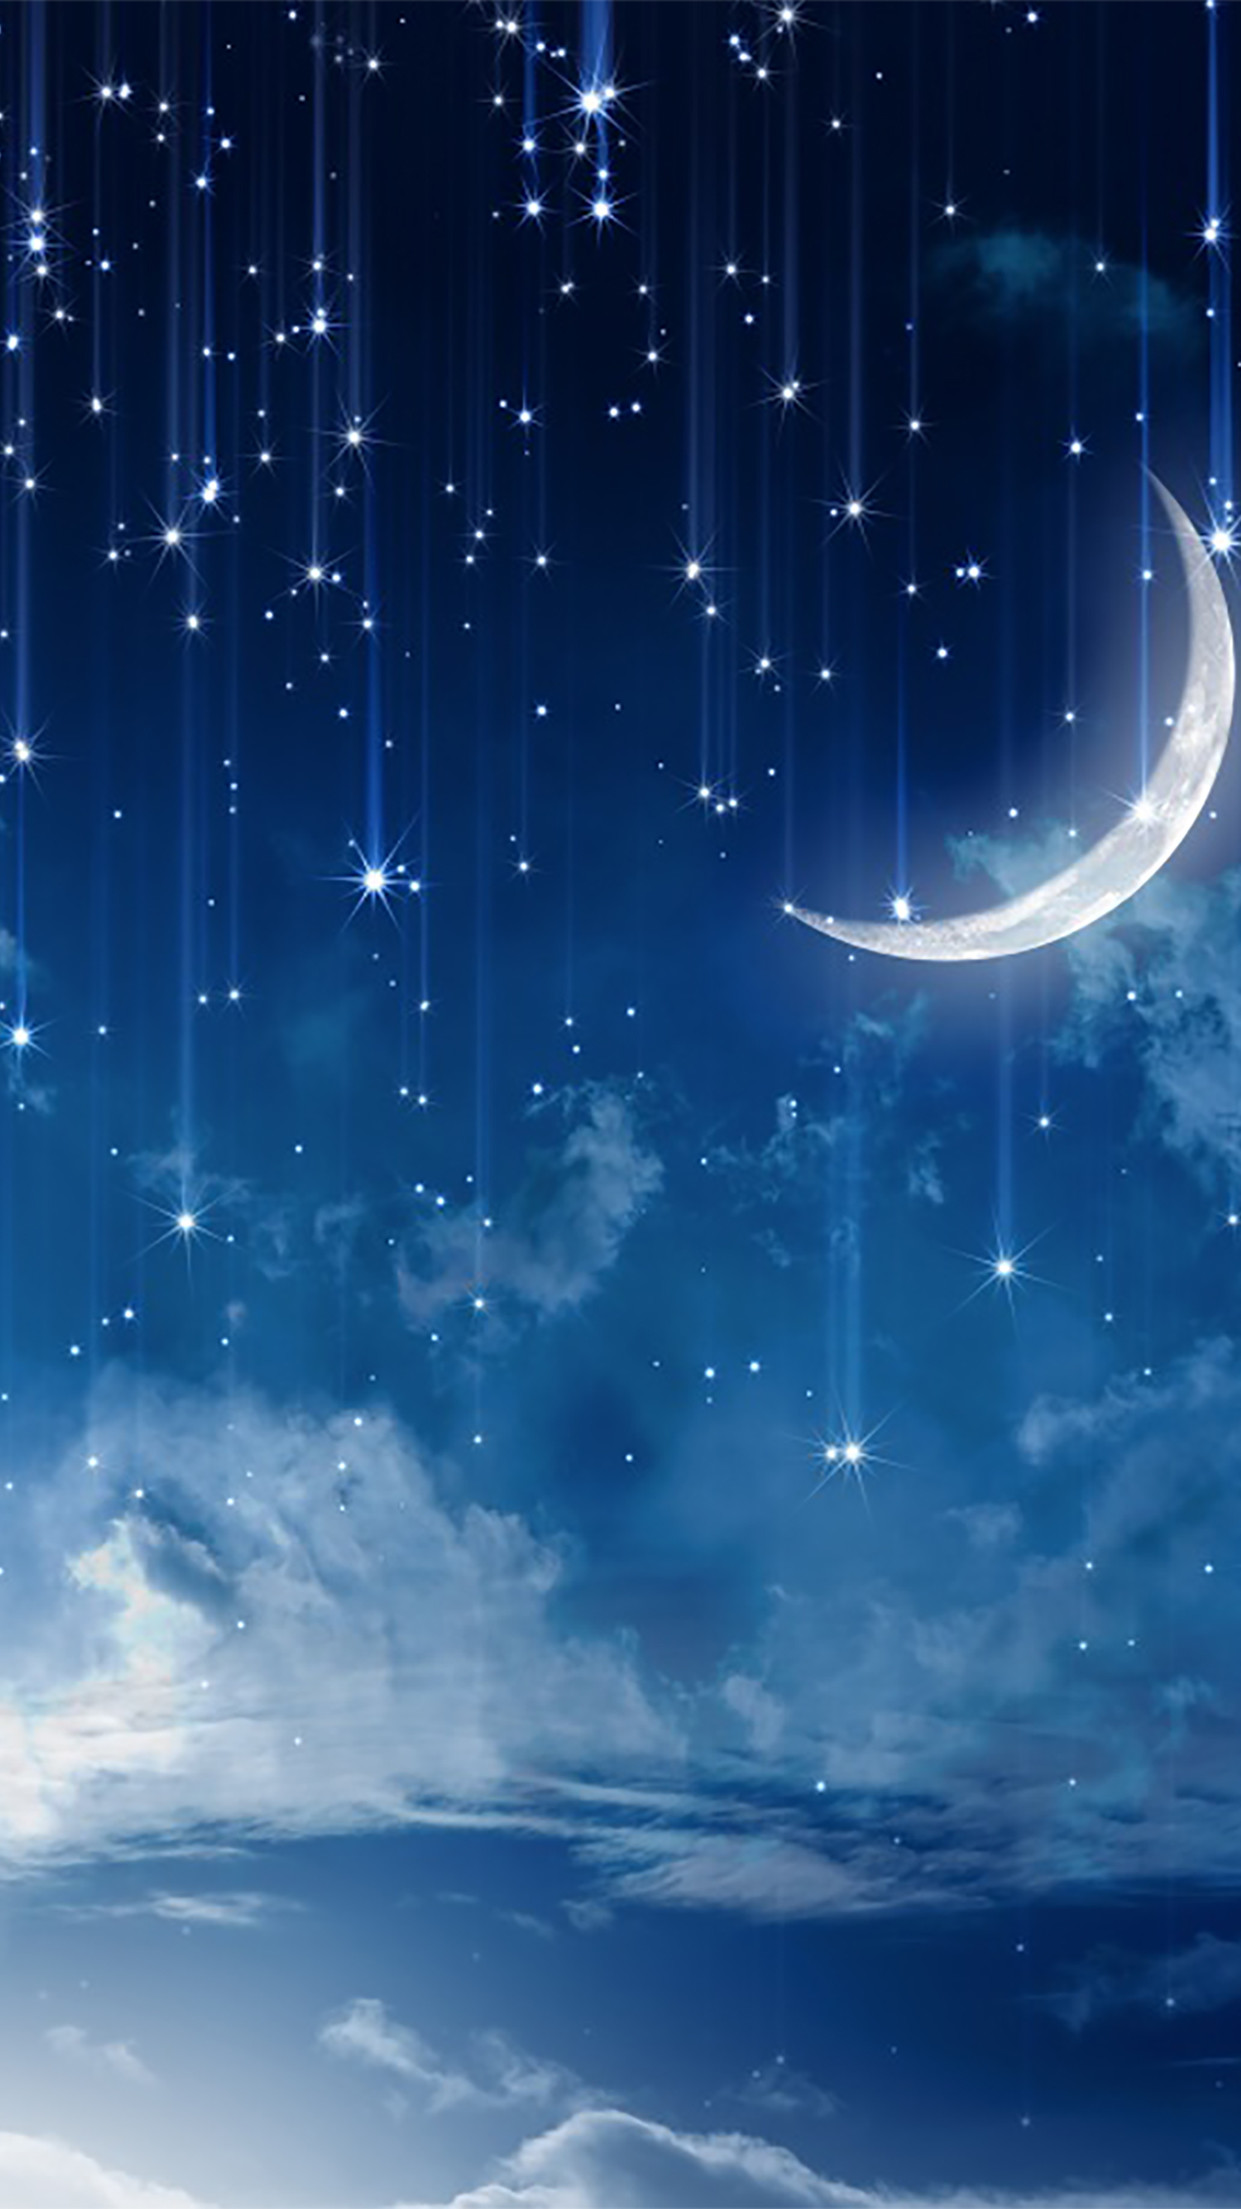 1241x2209 Sky Sky with Stars and Moon 3Wallpapers iPhone Parallax Sky : Sky with stars  and moon